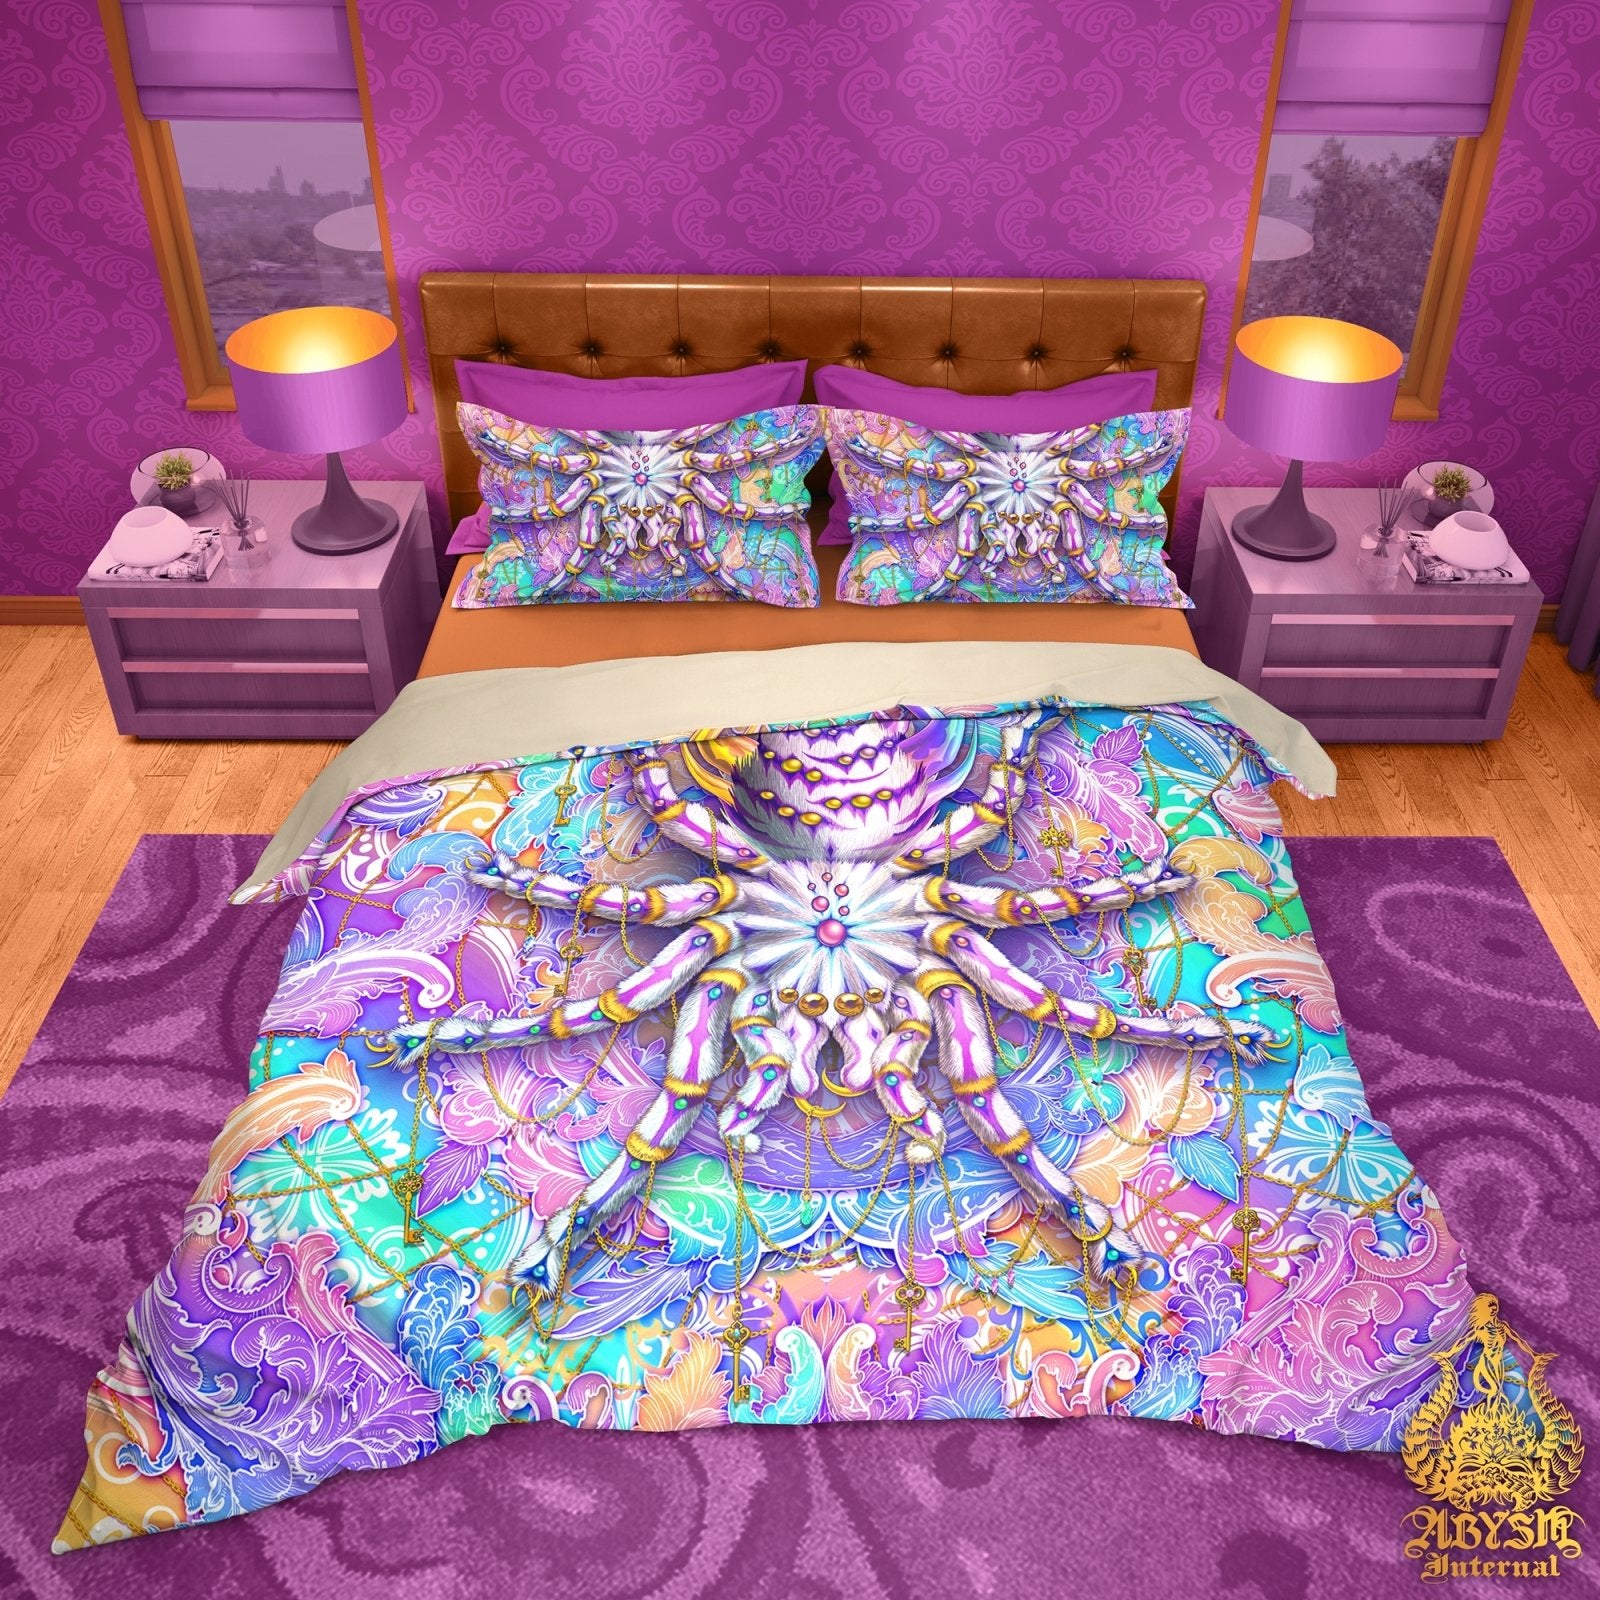 Aesthetic Bedding Set, Comforter and Duvet, Bed Cover and Bedroom Decor, King, Queen and Twin Size - Tarantula Spider, Holographic Pastel Style - Abysm Internal